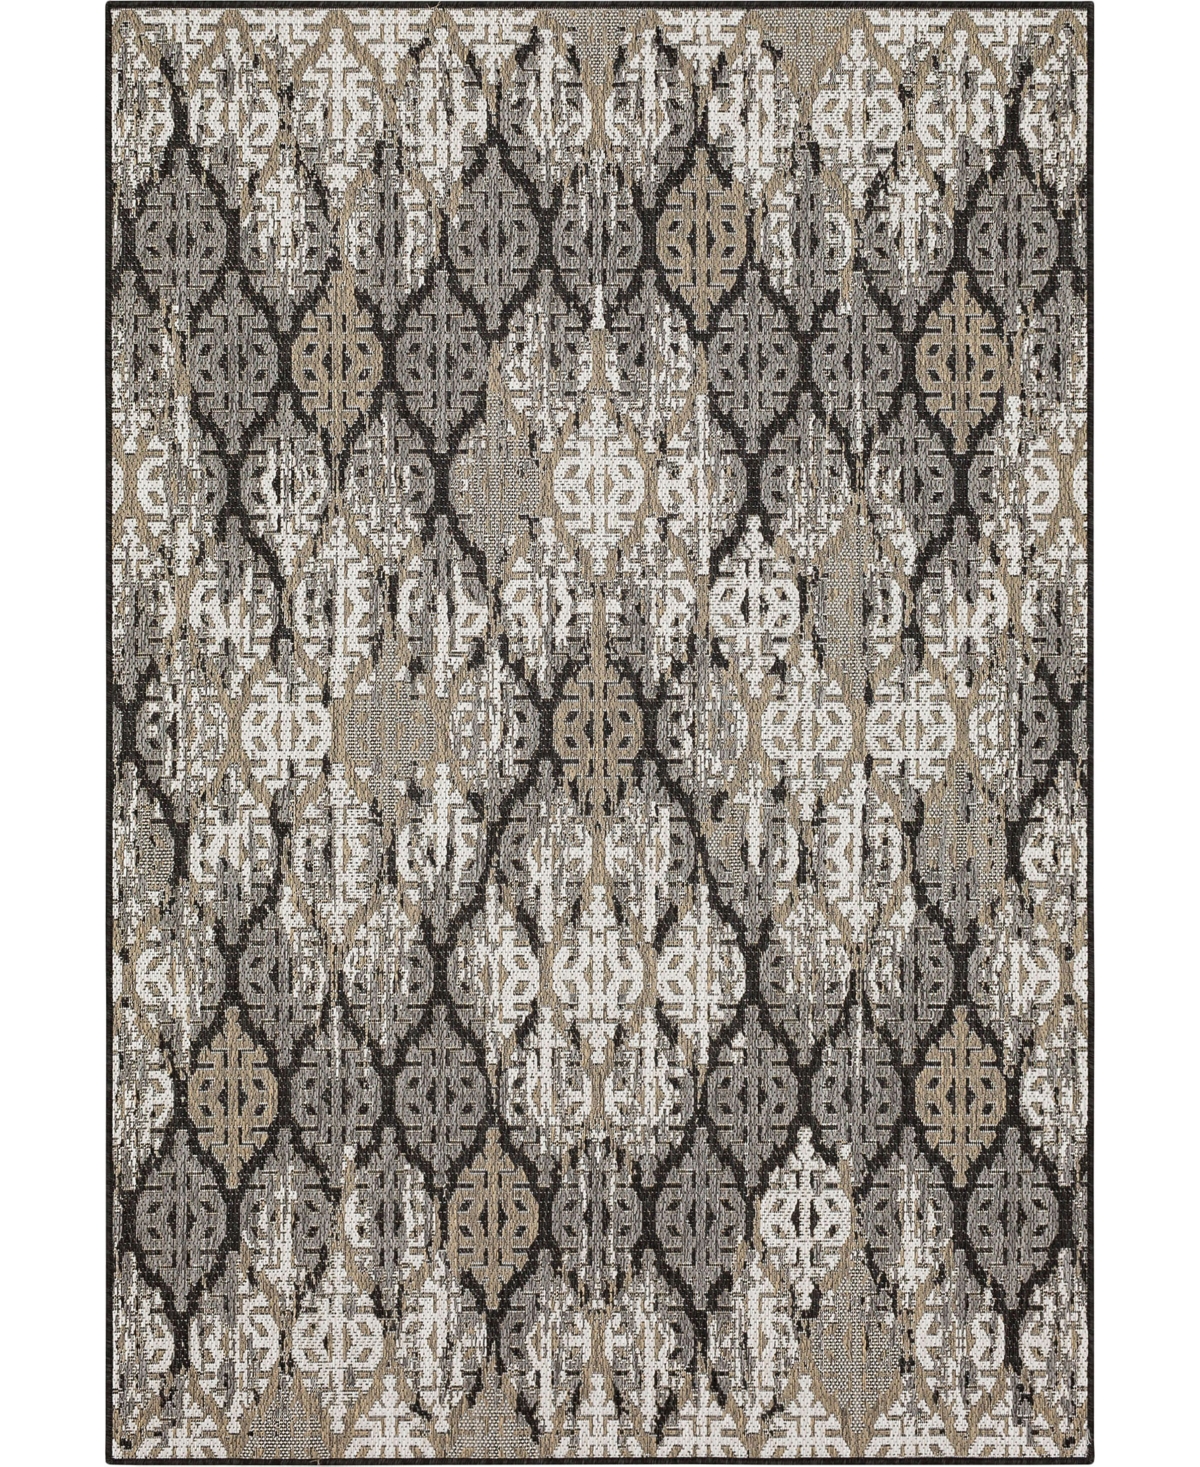 Mohawk Malibu Outdoor Stamped Ikat 4' X 5'6" Area Rug In Charcoal